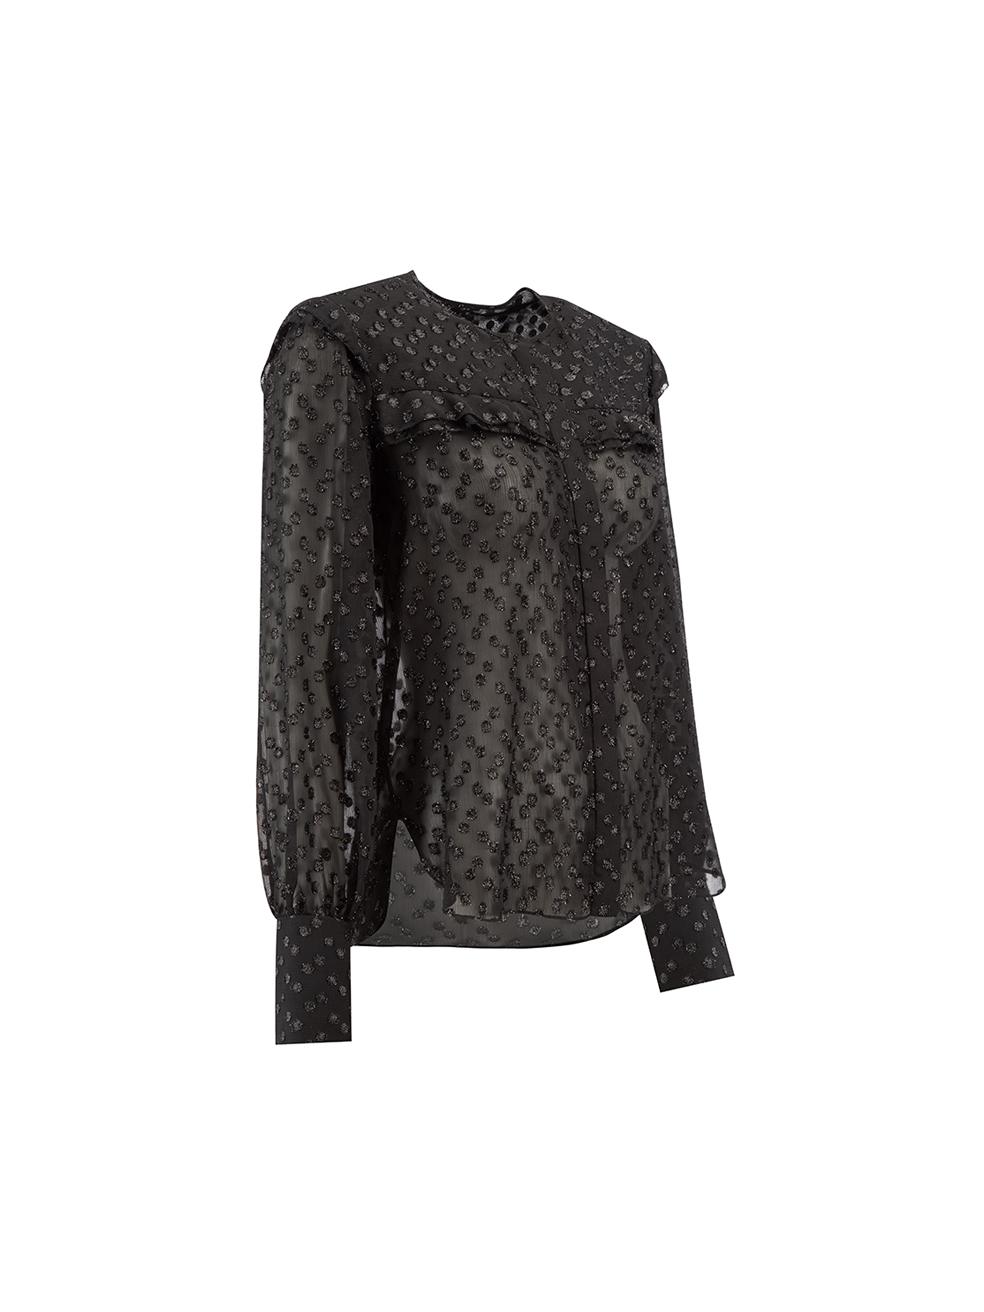 CONDITION is Very good. Minimal wear to blouse is evident. Minimal wear to the press studs at both cuffs with loose threads on this used Isabel Marant designer resale item.



Details


Black

Polyester

Blouse

Sheer

Metallic polkadot